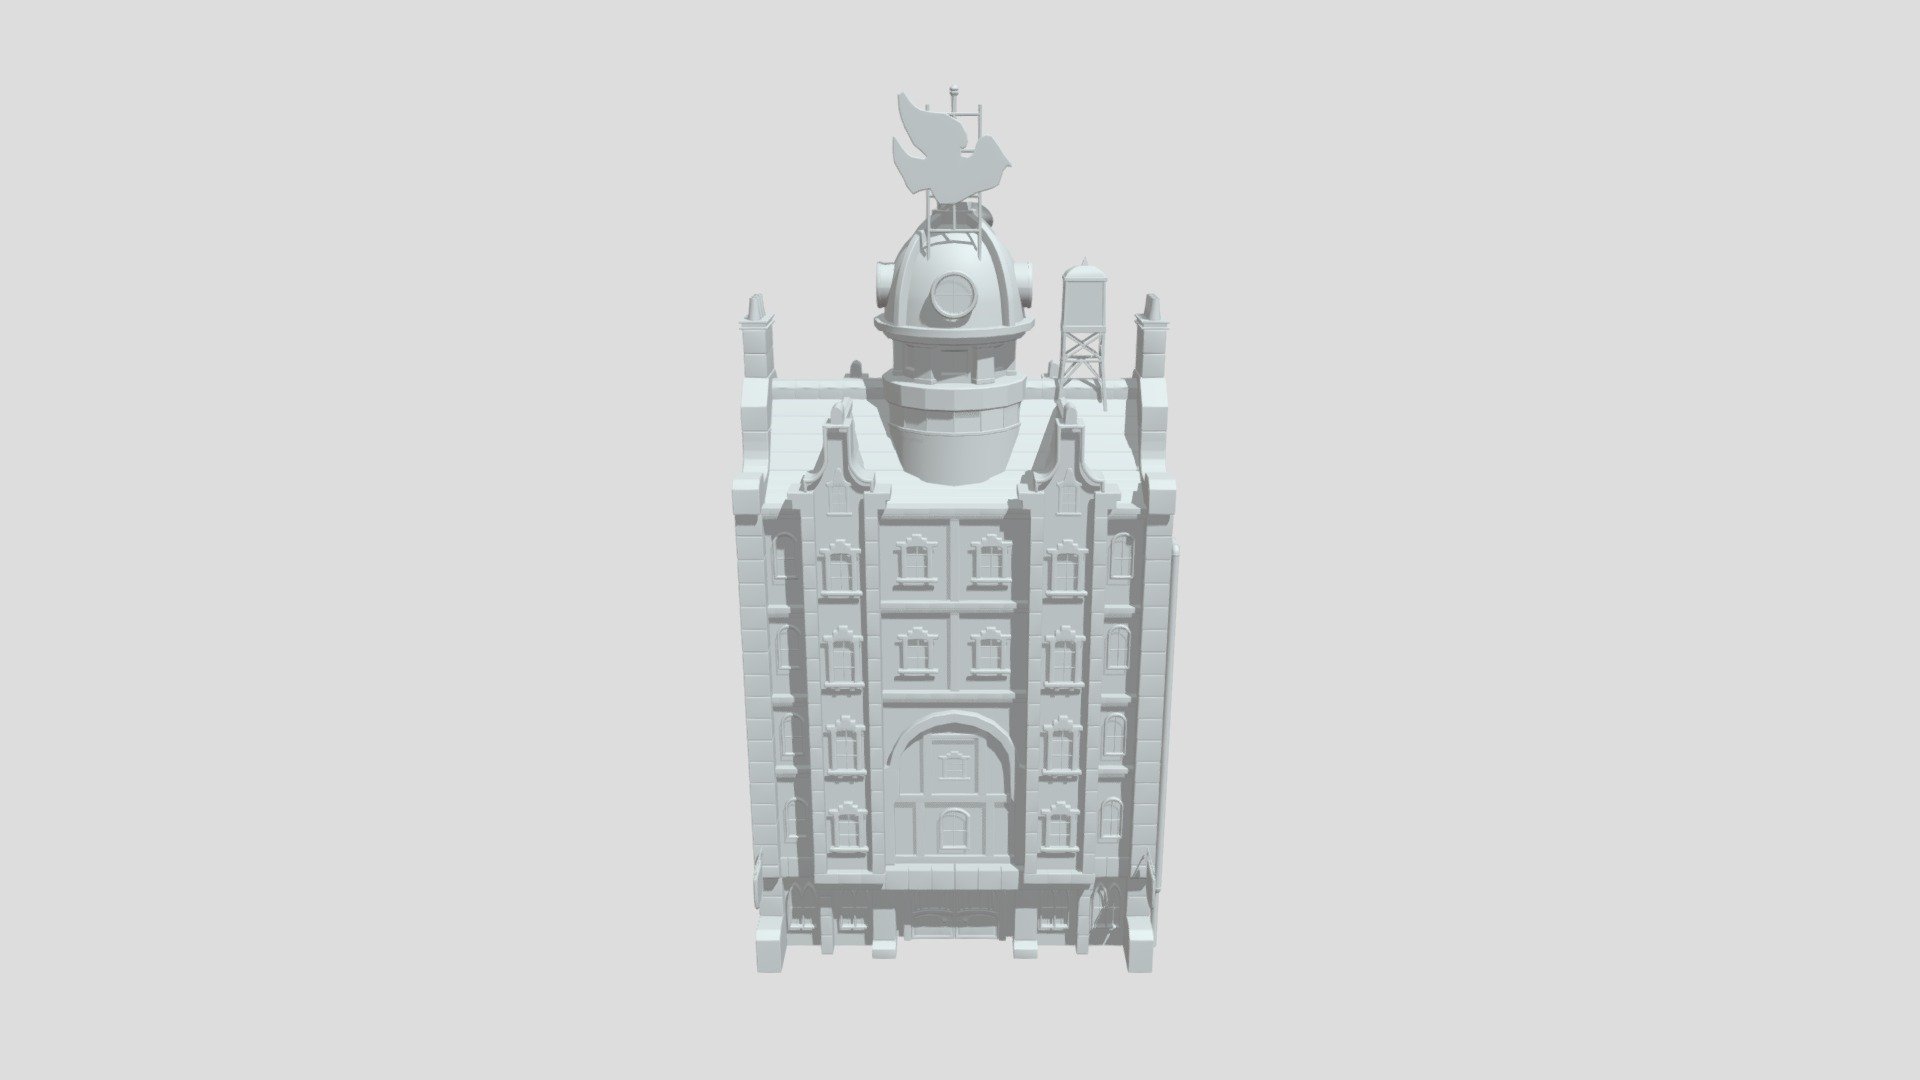 Modular Asset Pack Modeledin Maya 2022
Based on Concept Art https://pin.it/1ouRXop
50 Total Pieces - Steampunk Building: Modular Kit Project - 3D model by kmagpuri 3d model